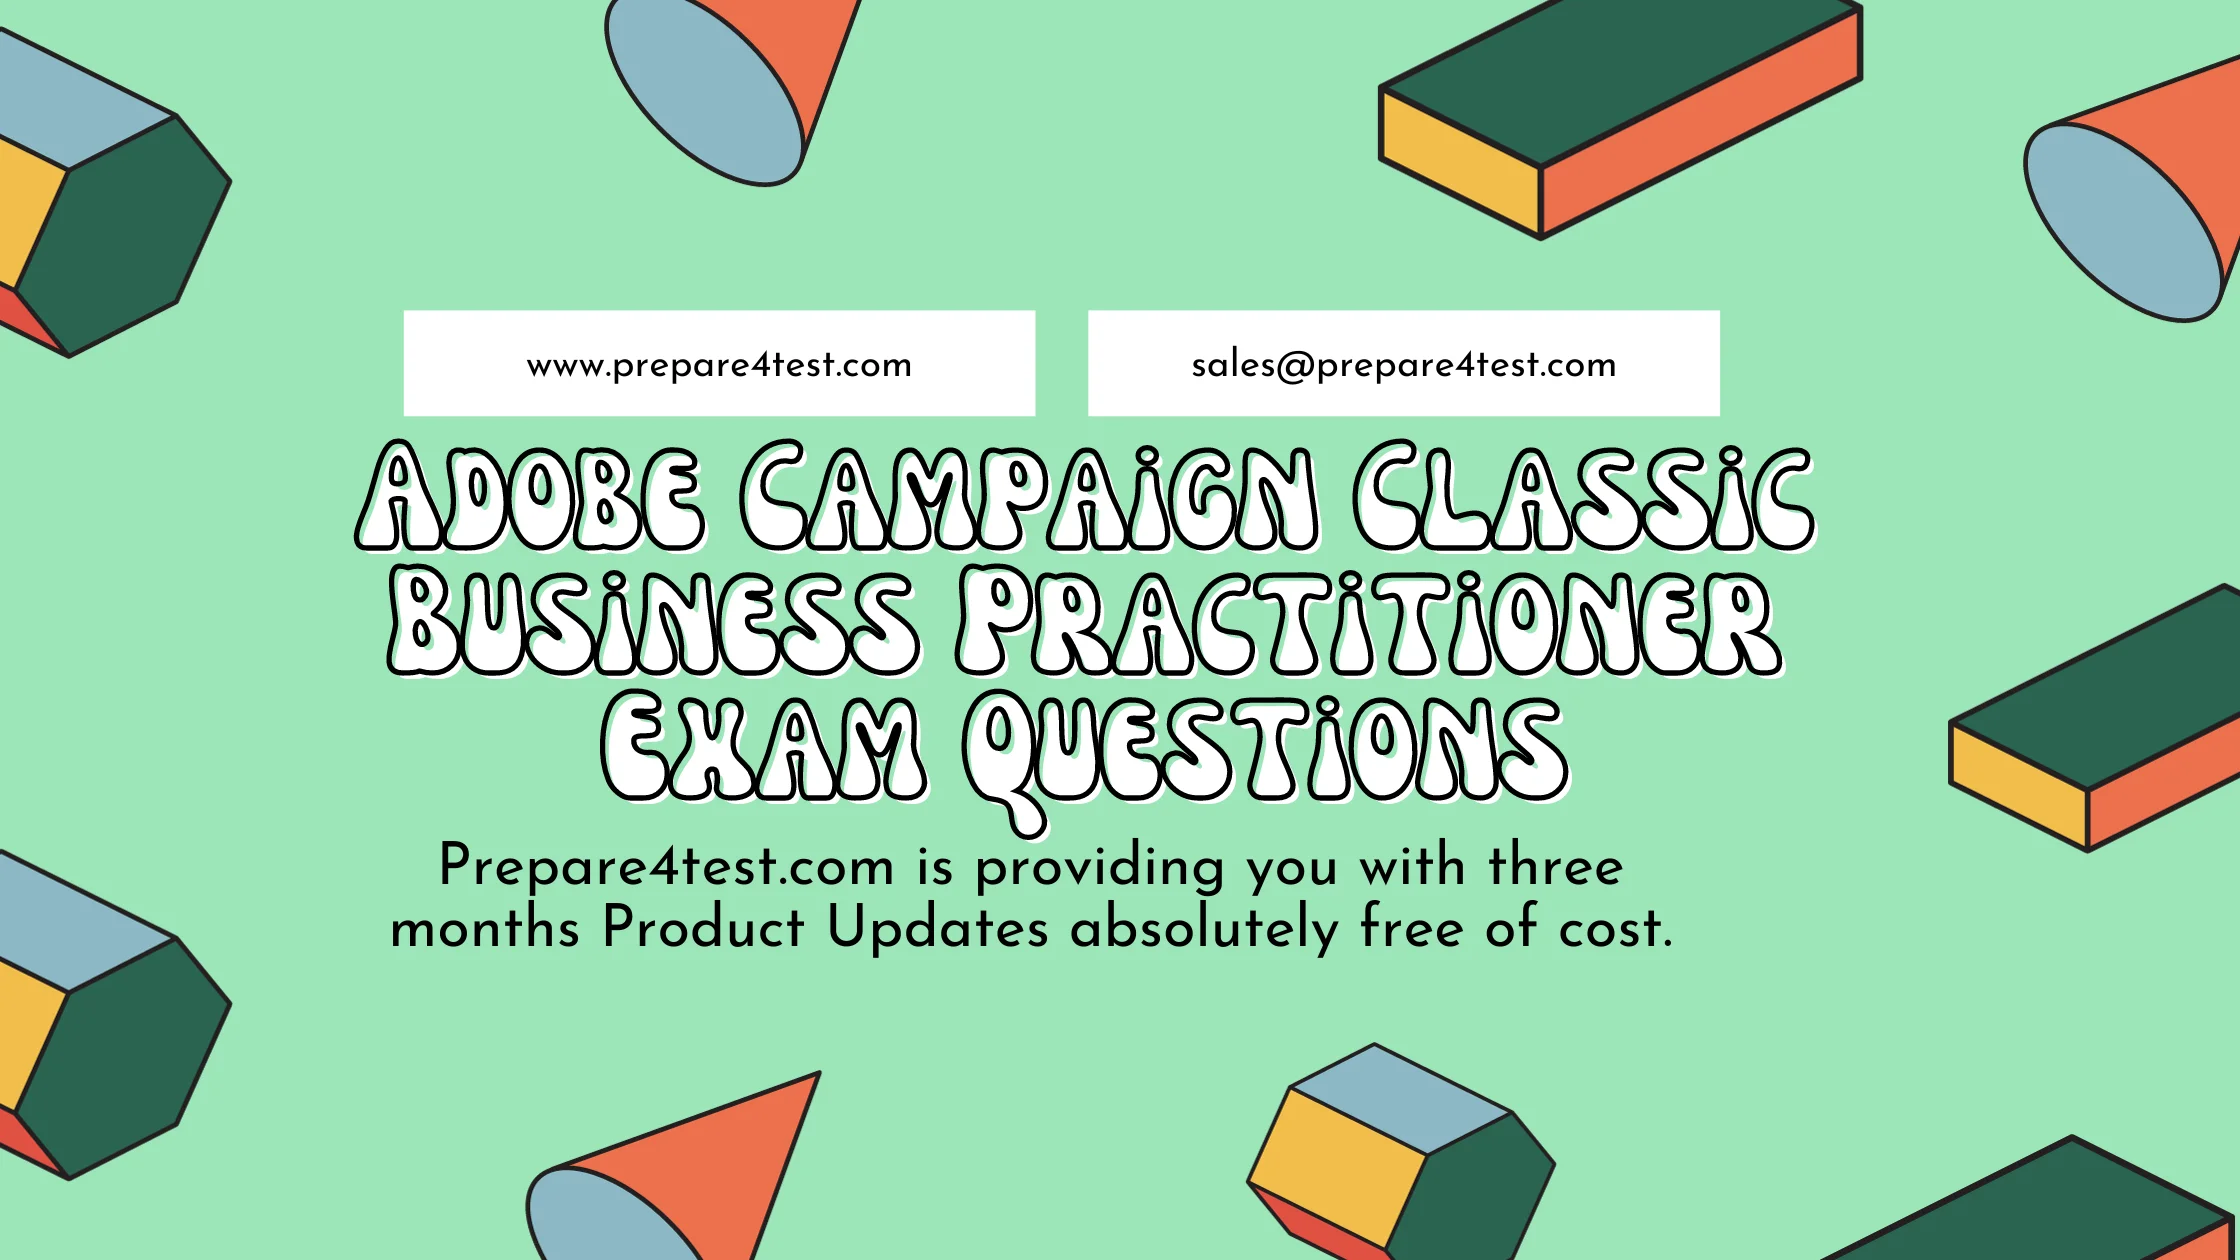 Adobe Campaign Classic Business Practitioner Exam Questions